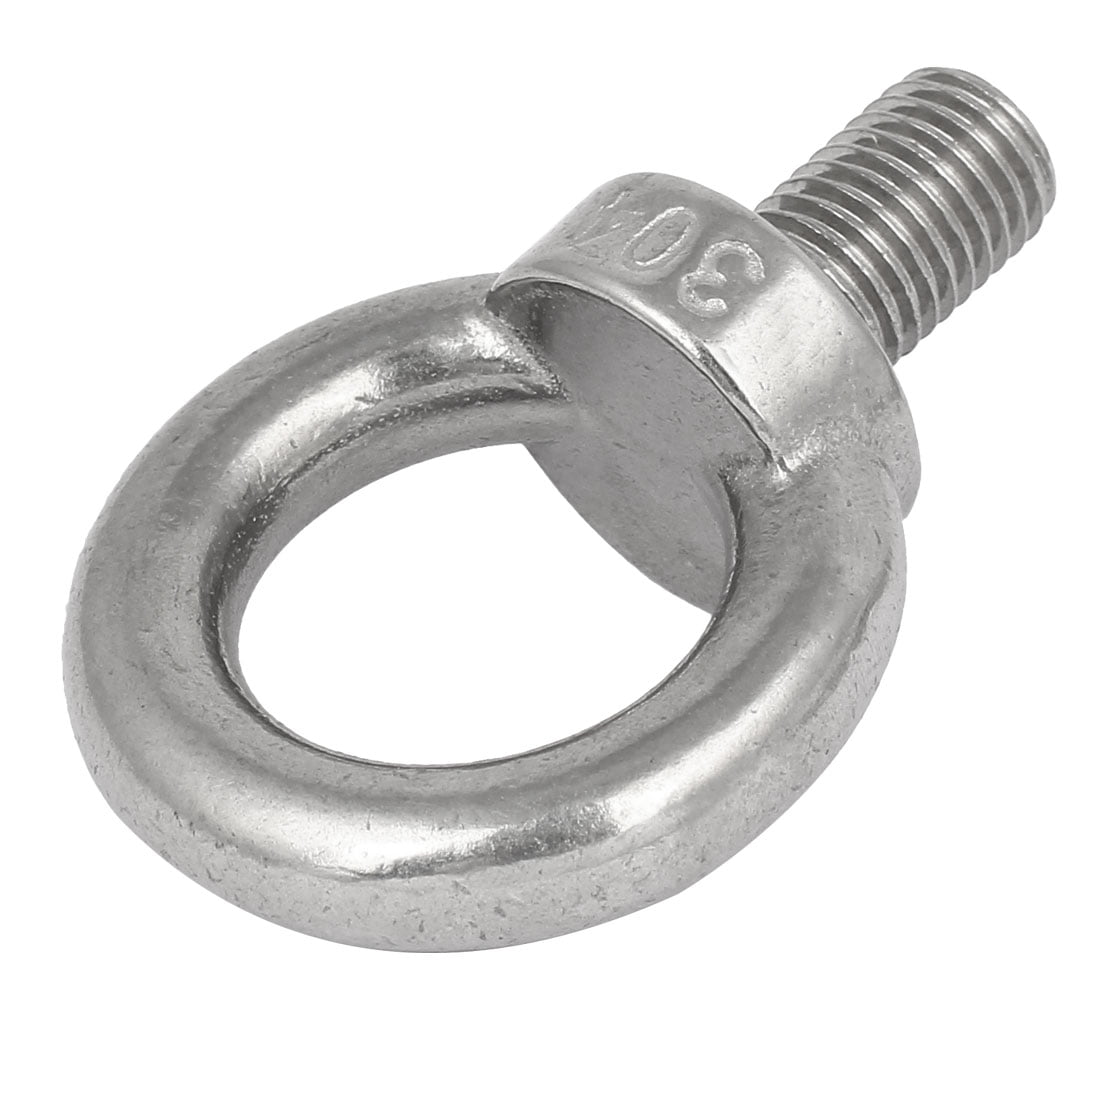 M16 304 Stainless Steel Ring Shape Machinery Shoulder Lifting Eye Bolt